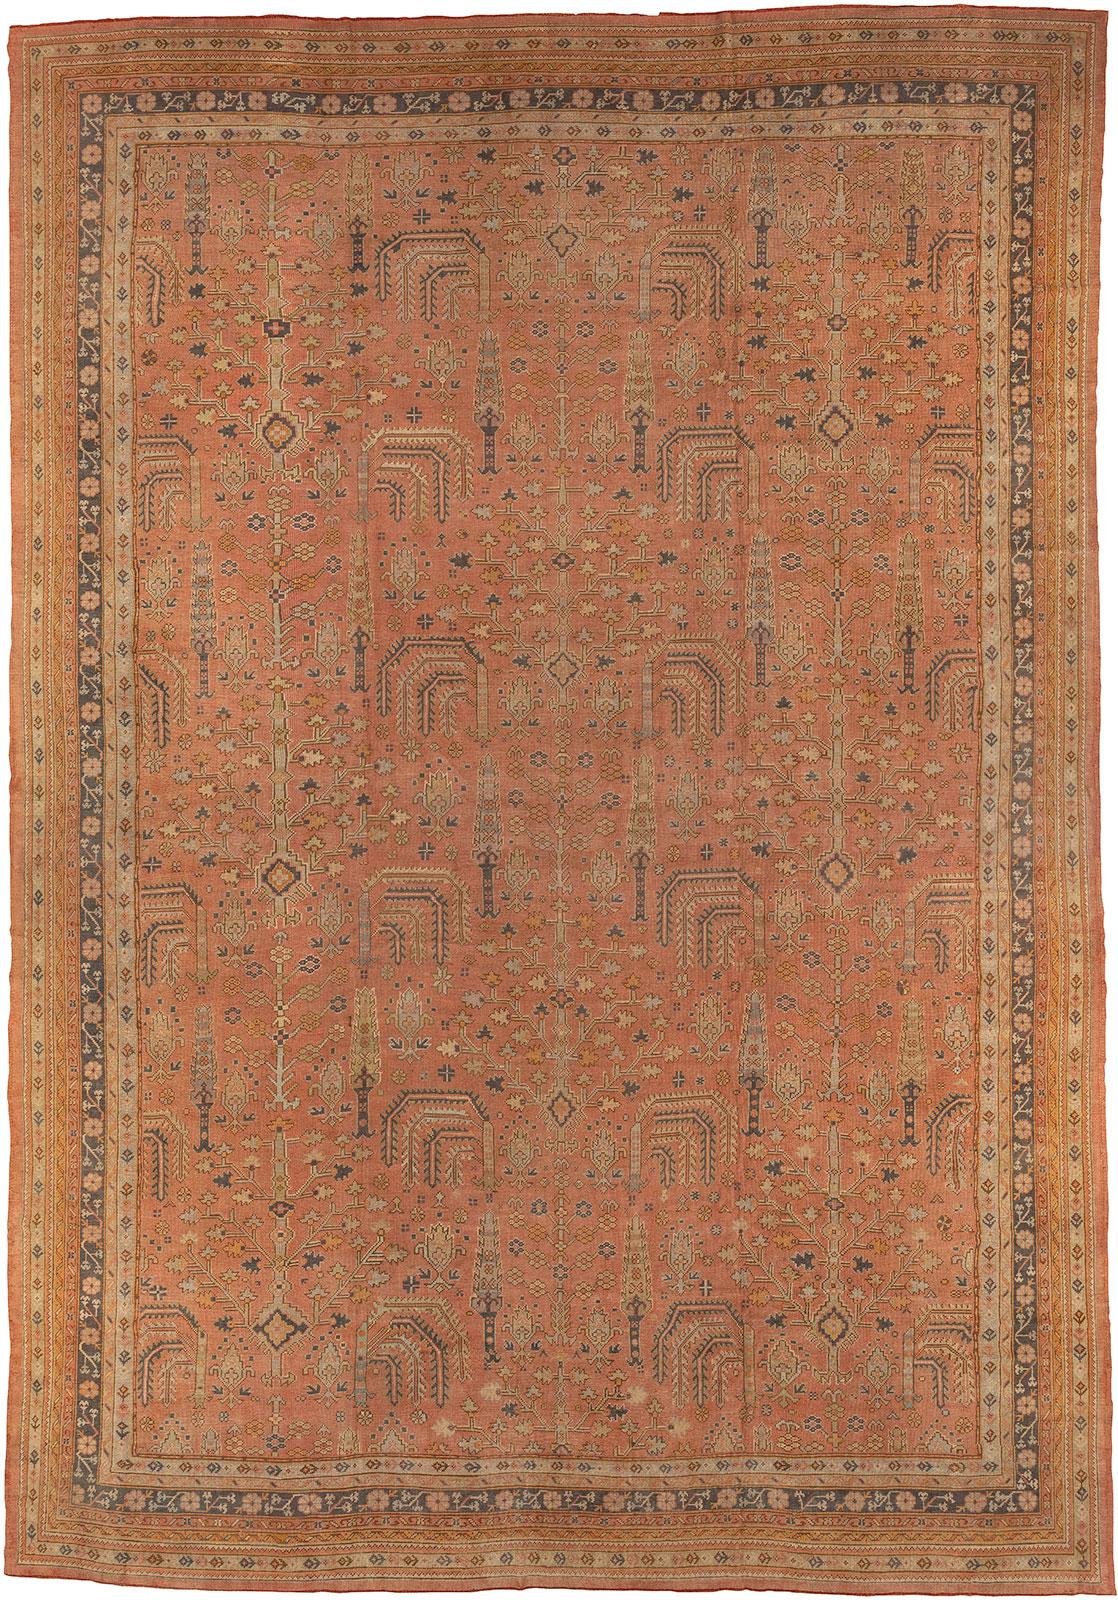 Phenomenal large size handmade Turkish Oushak in muted colors featururing an all over cypress/ willow tree design 

Measures: 14'9'' x 21'1''

Oushak rugs originated in the small town of Oushak in west-central Anatolia, today just south of Istanbul,